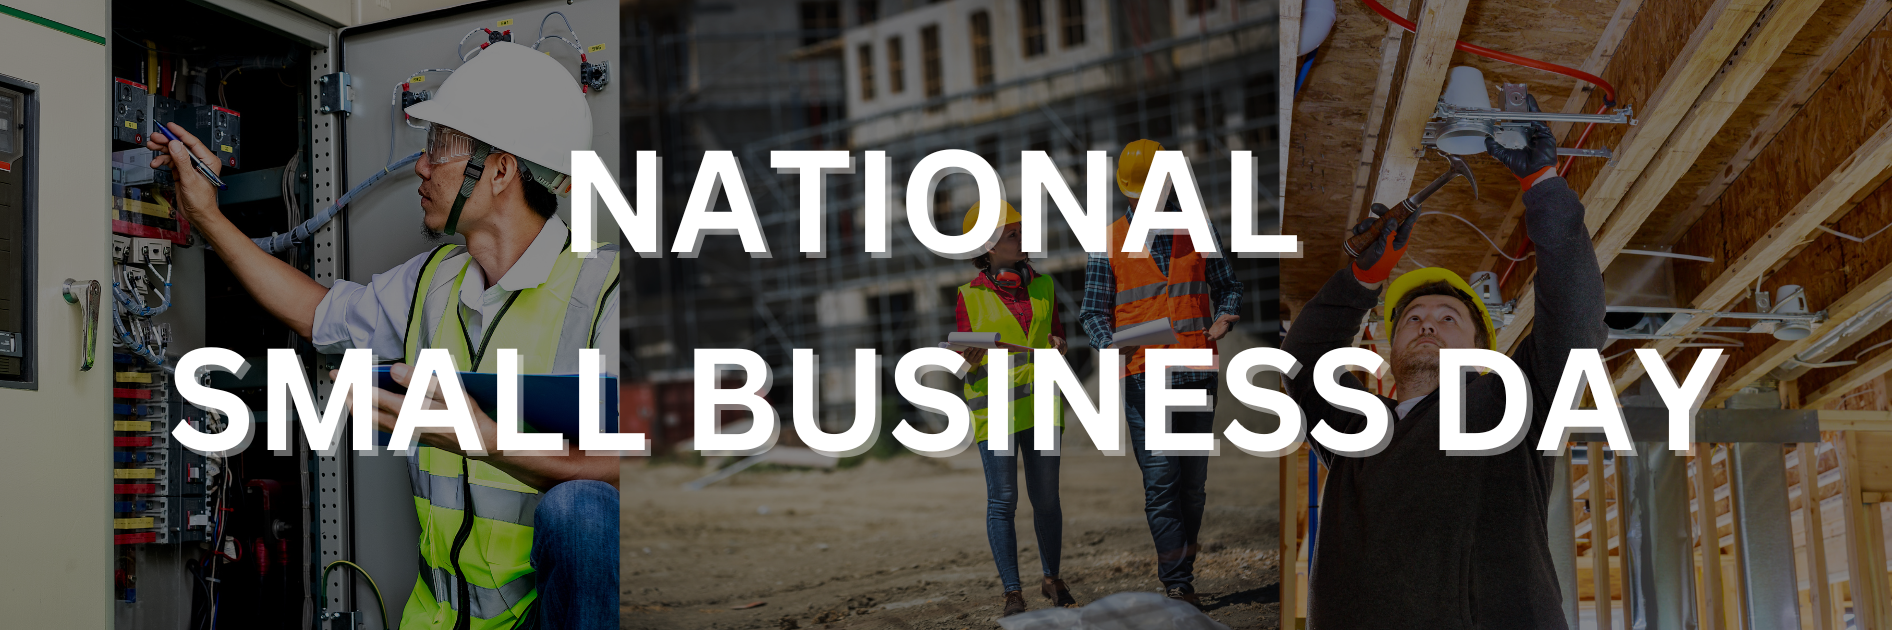 national small business day cover